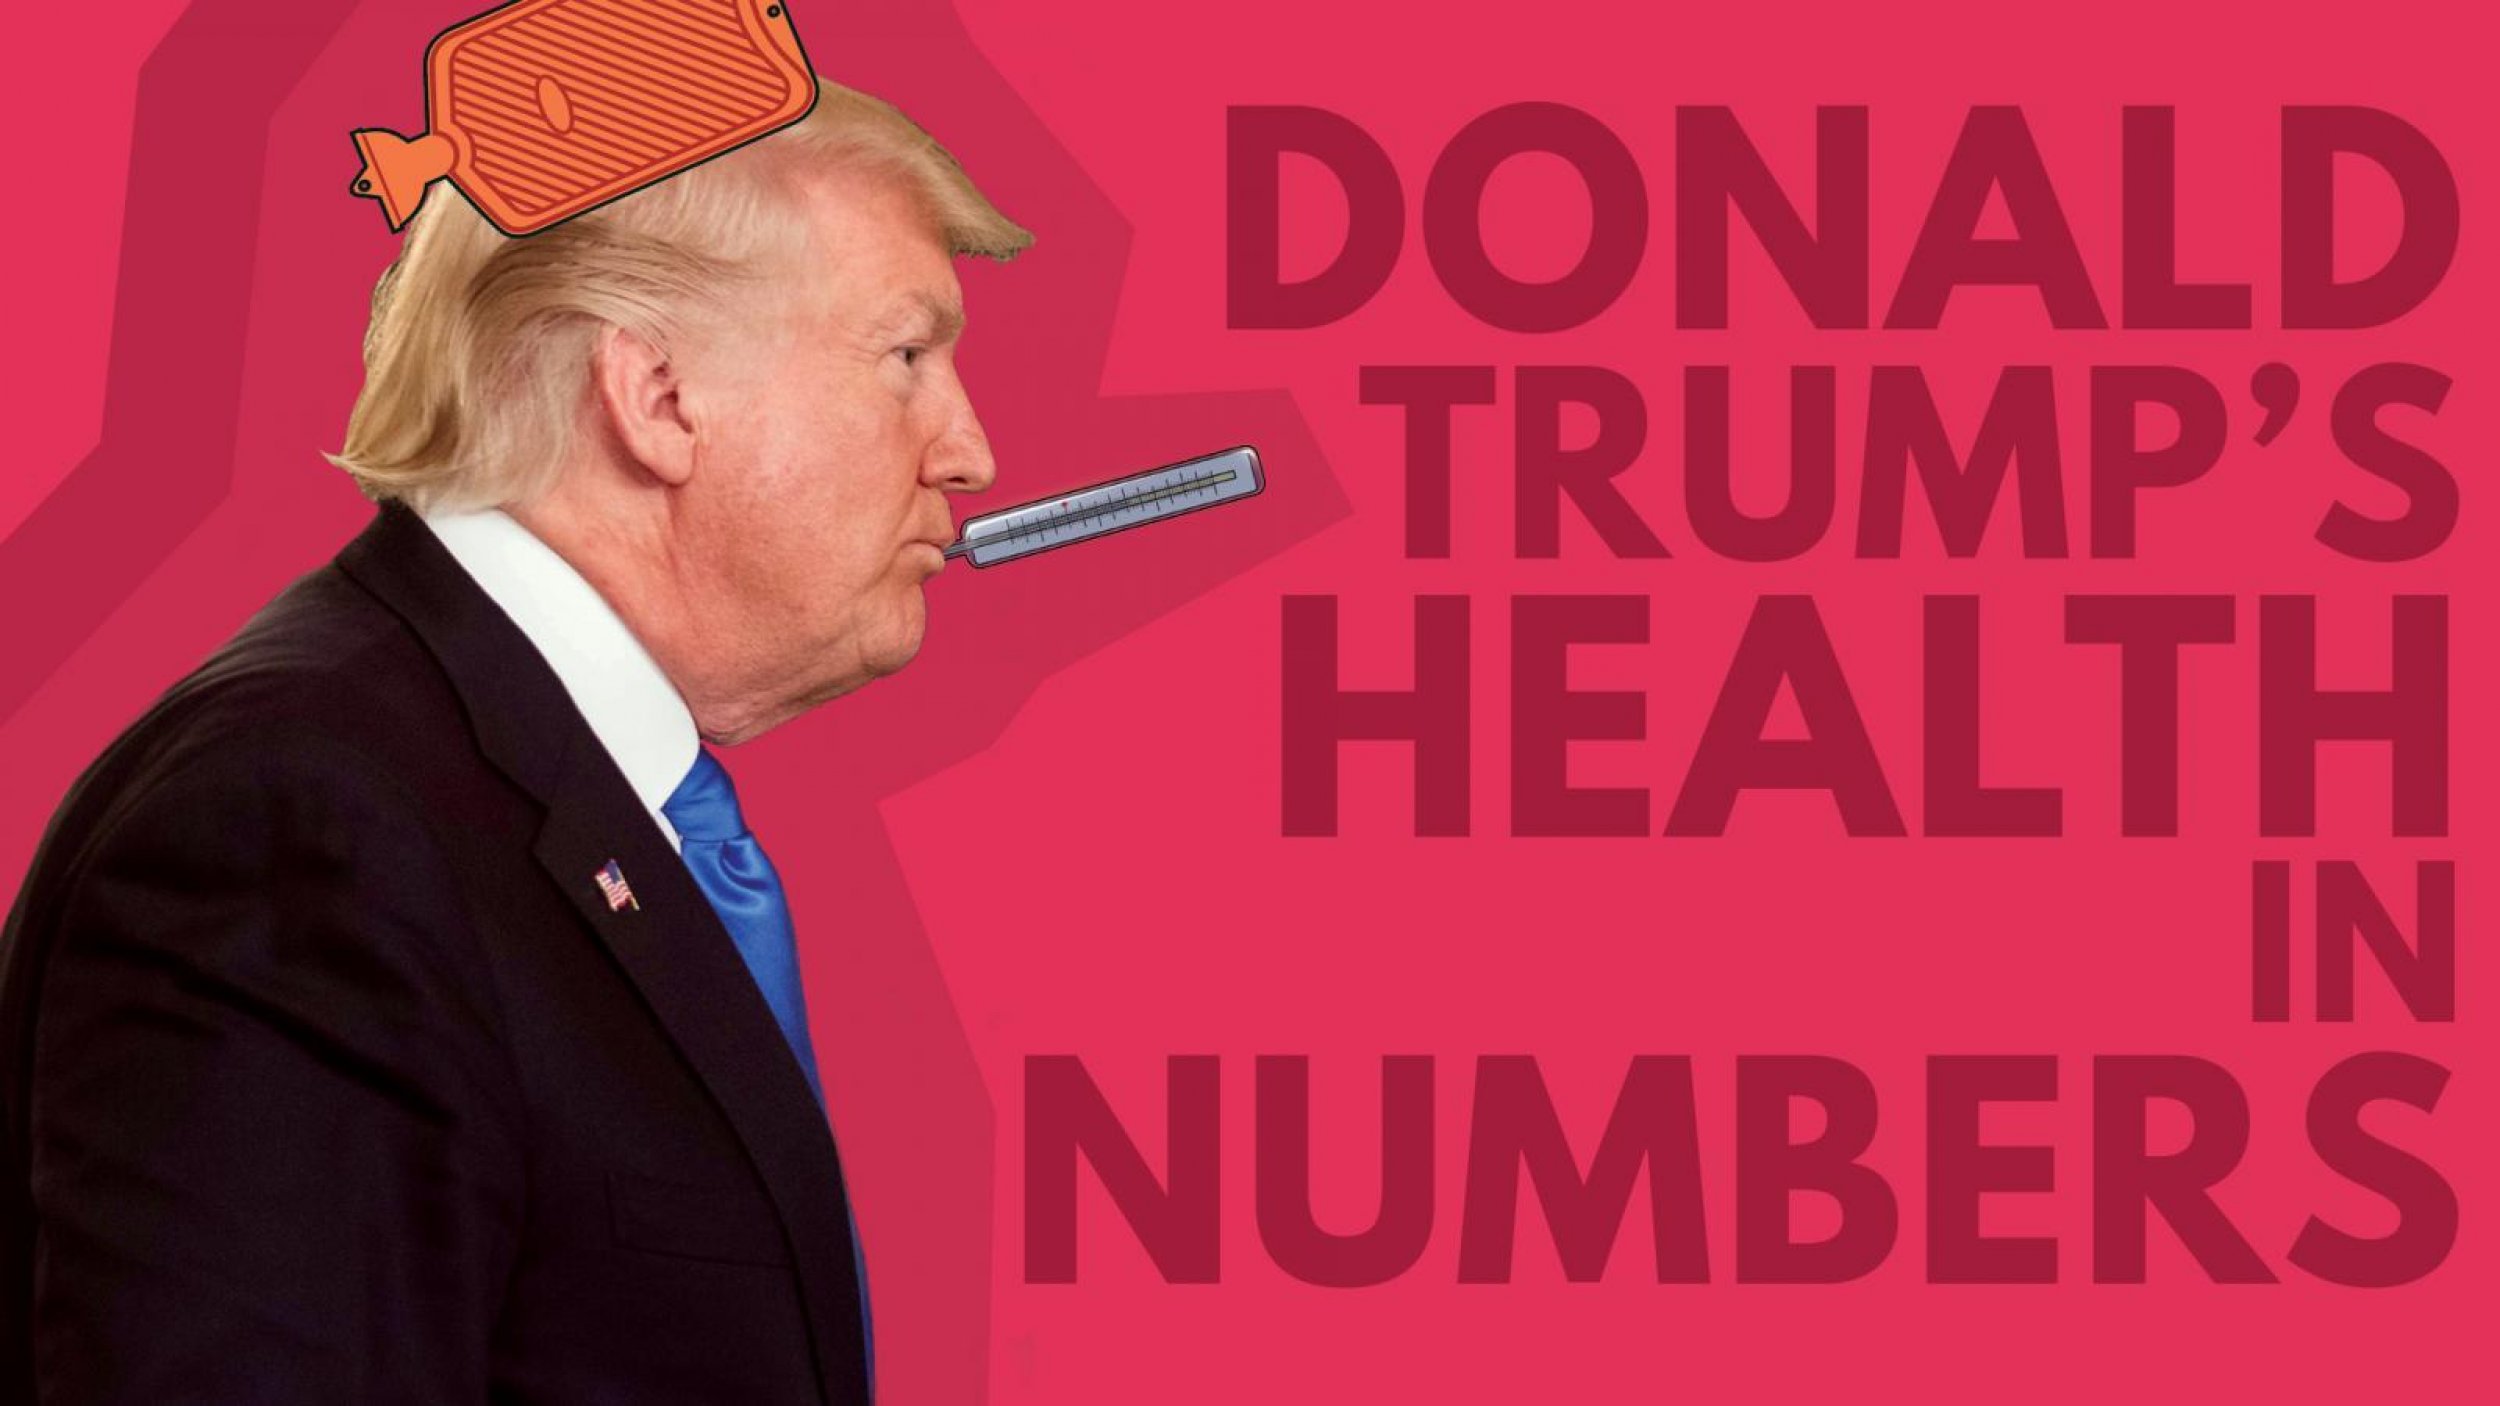 Donald Trumps Health In Numbers